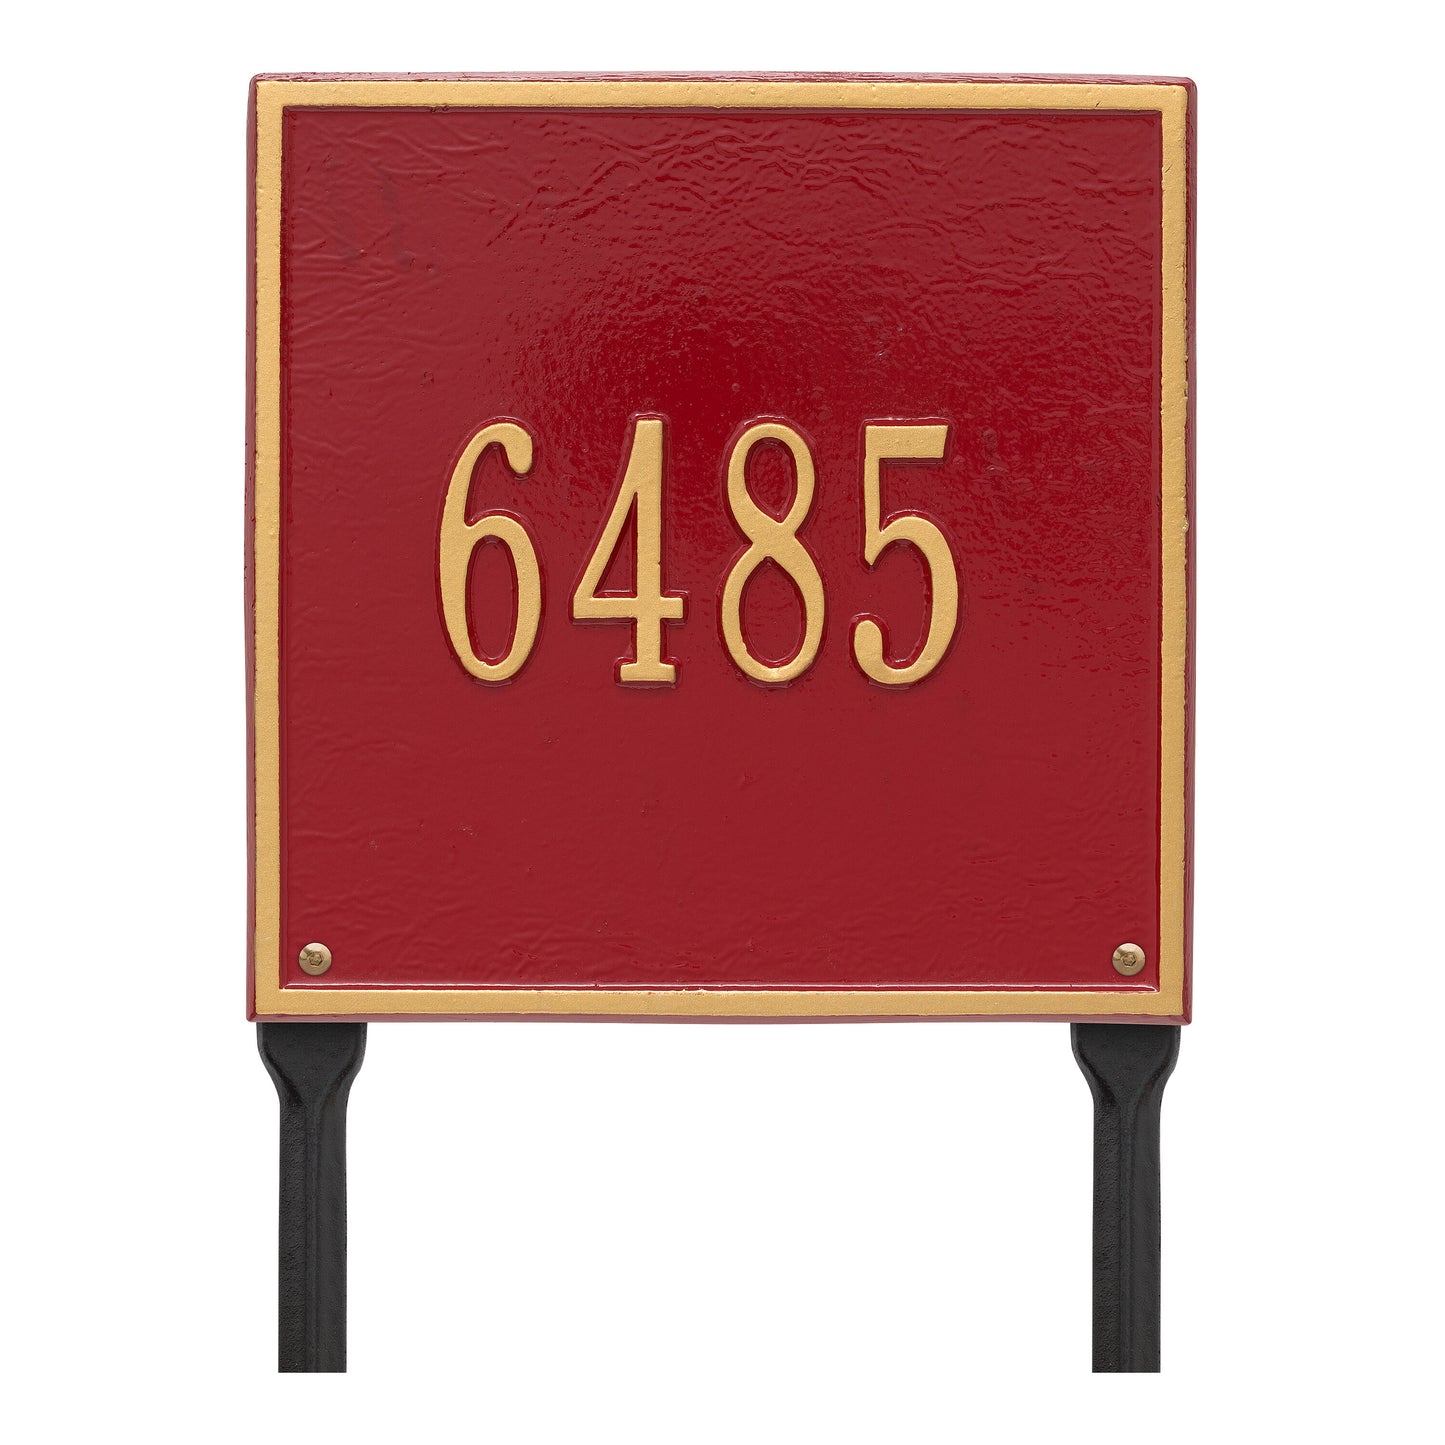 Whitehall Products Personalized Square Standard Lawn Plaque One Line White/gold